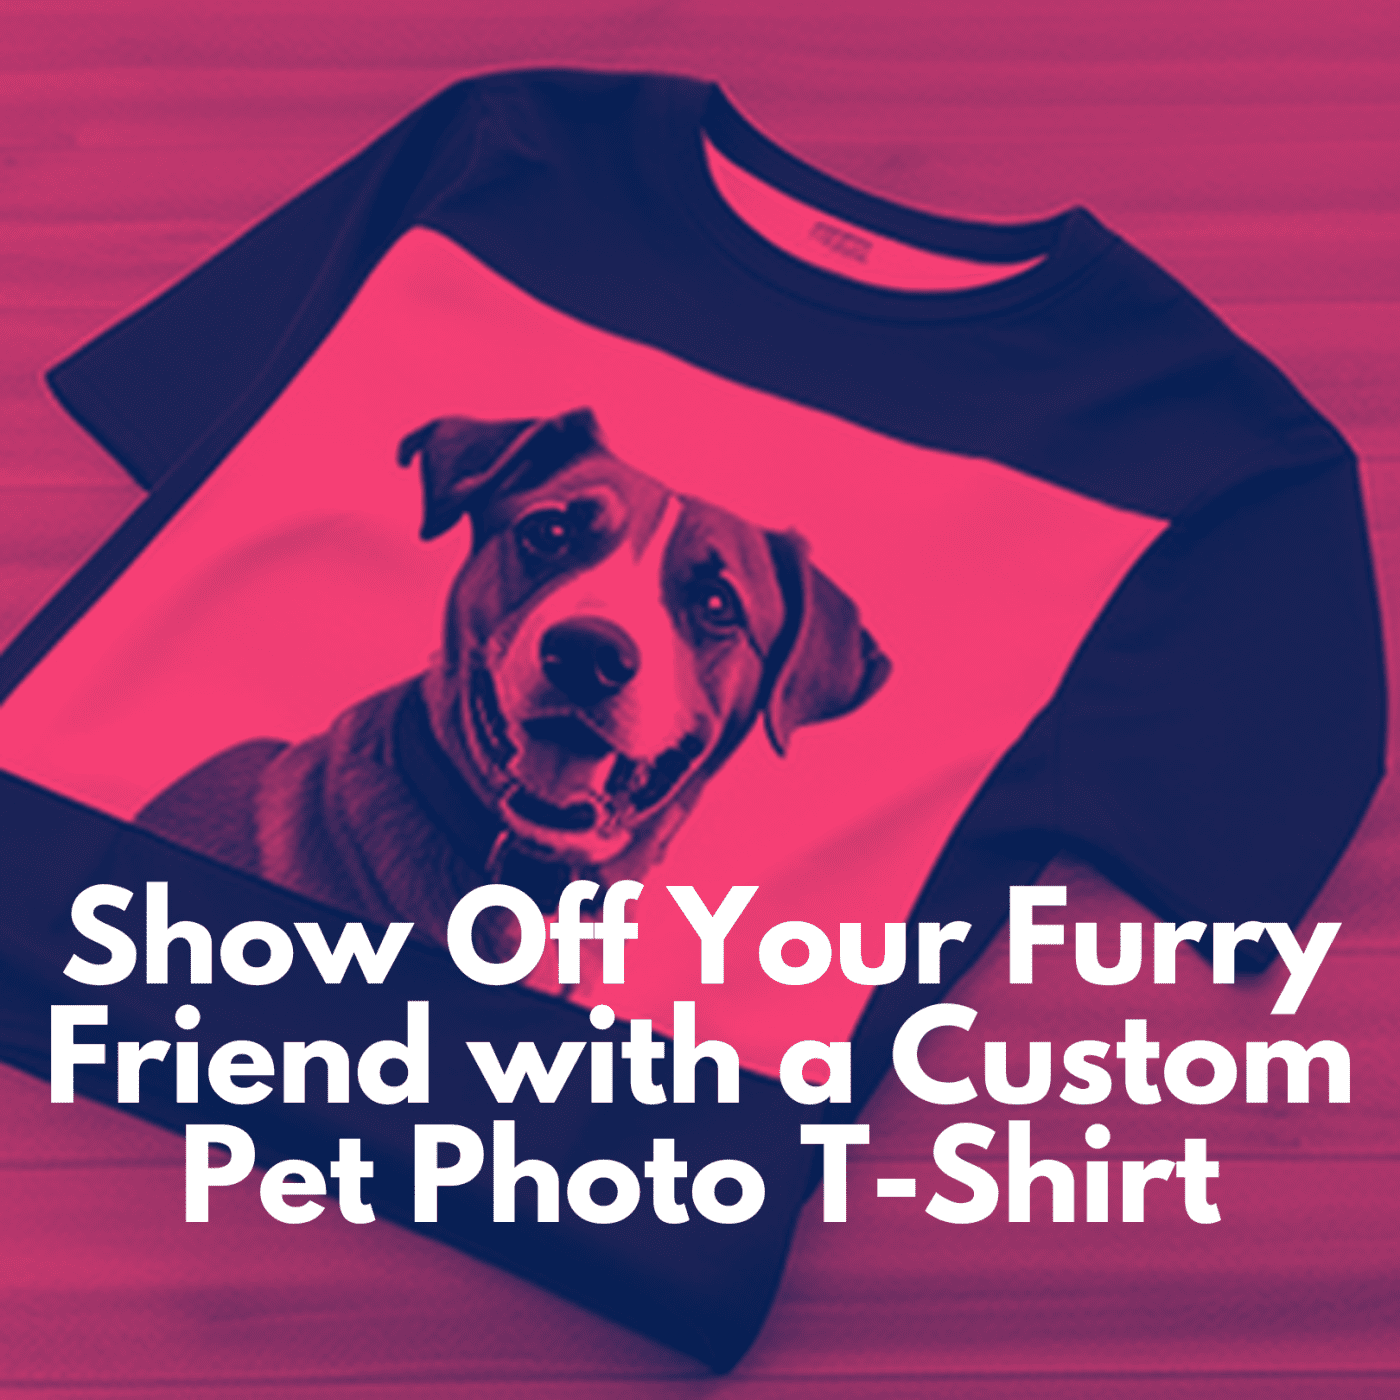 Show Off Your Furry Friend with a Custom Pet Photo T-Shirt